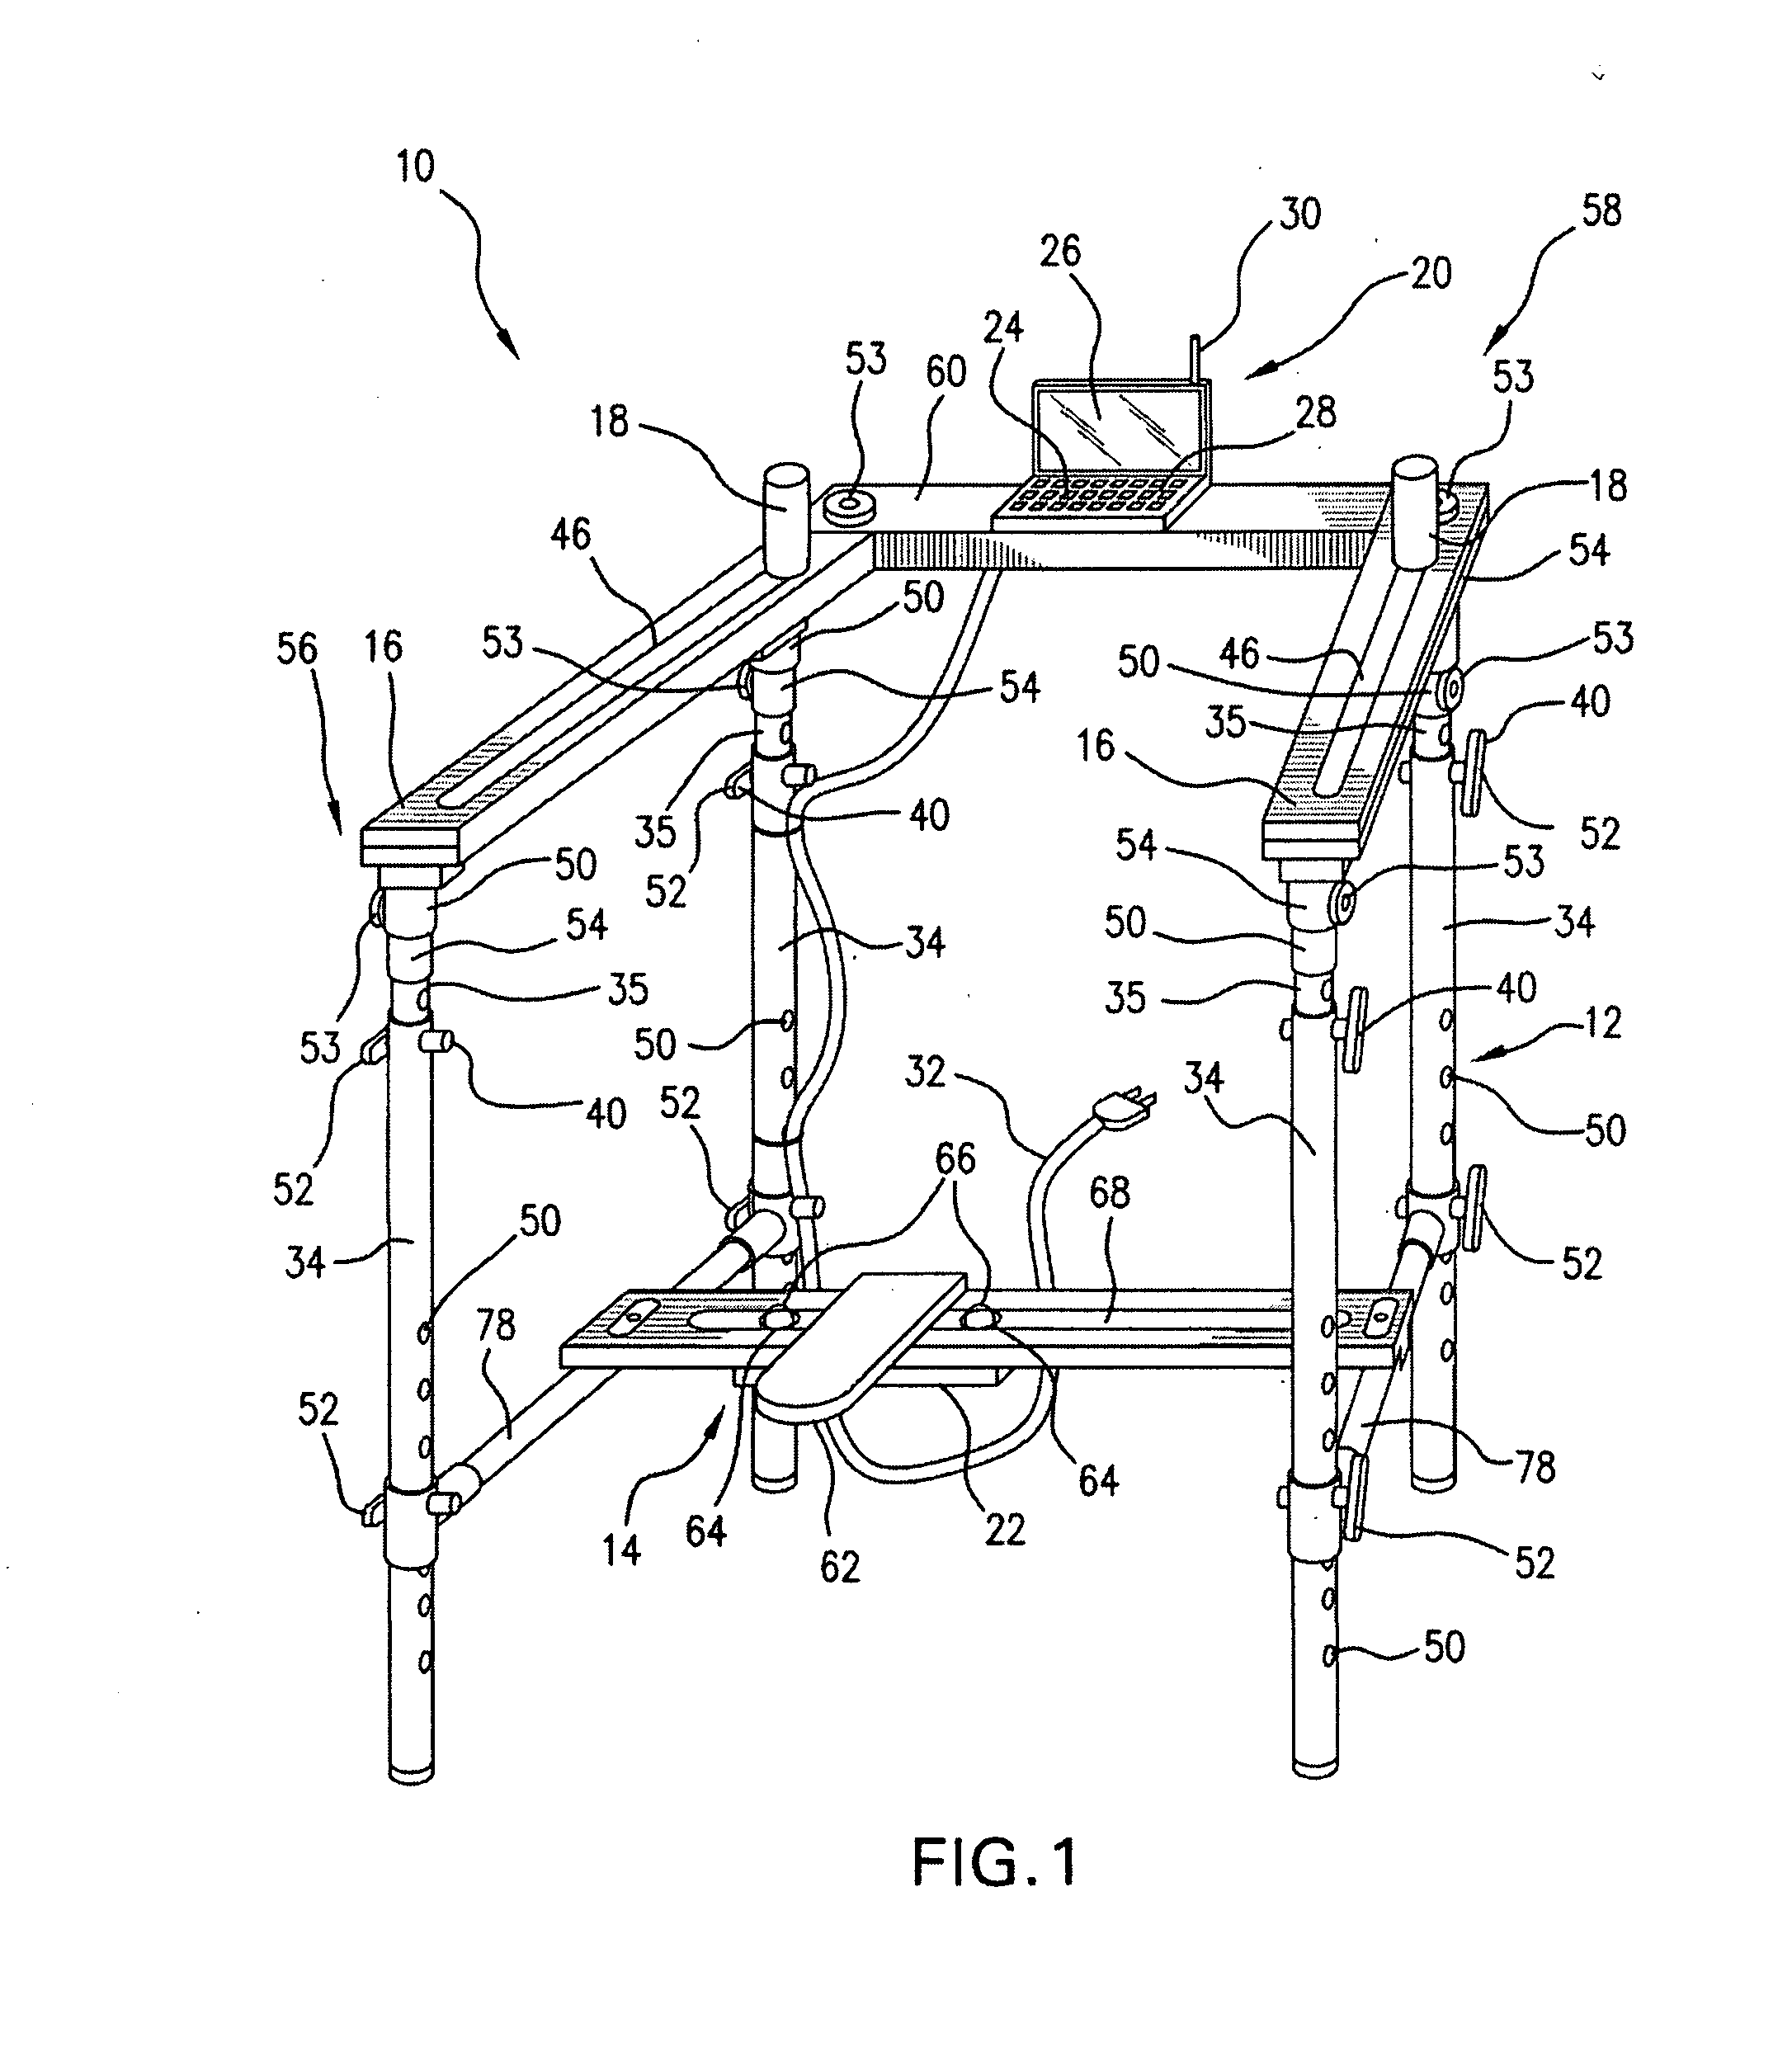 Orthopedic therapy system and device and a method of use